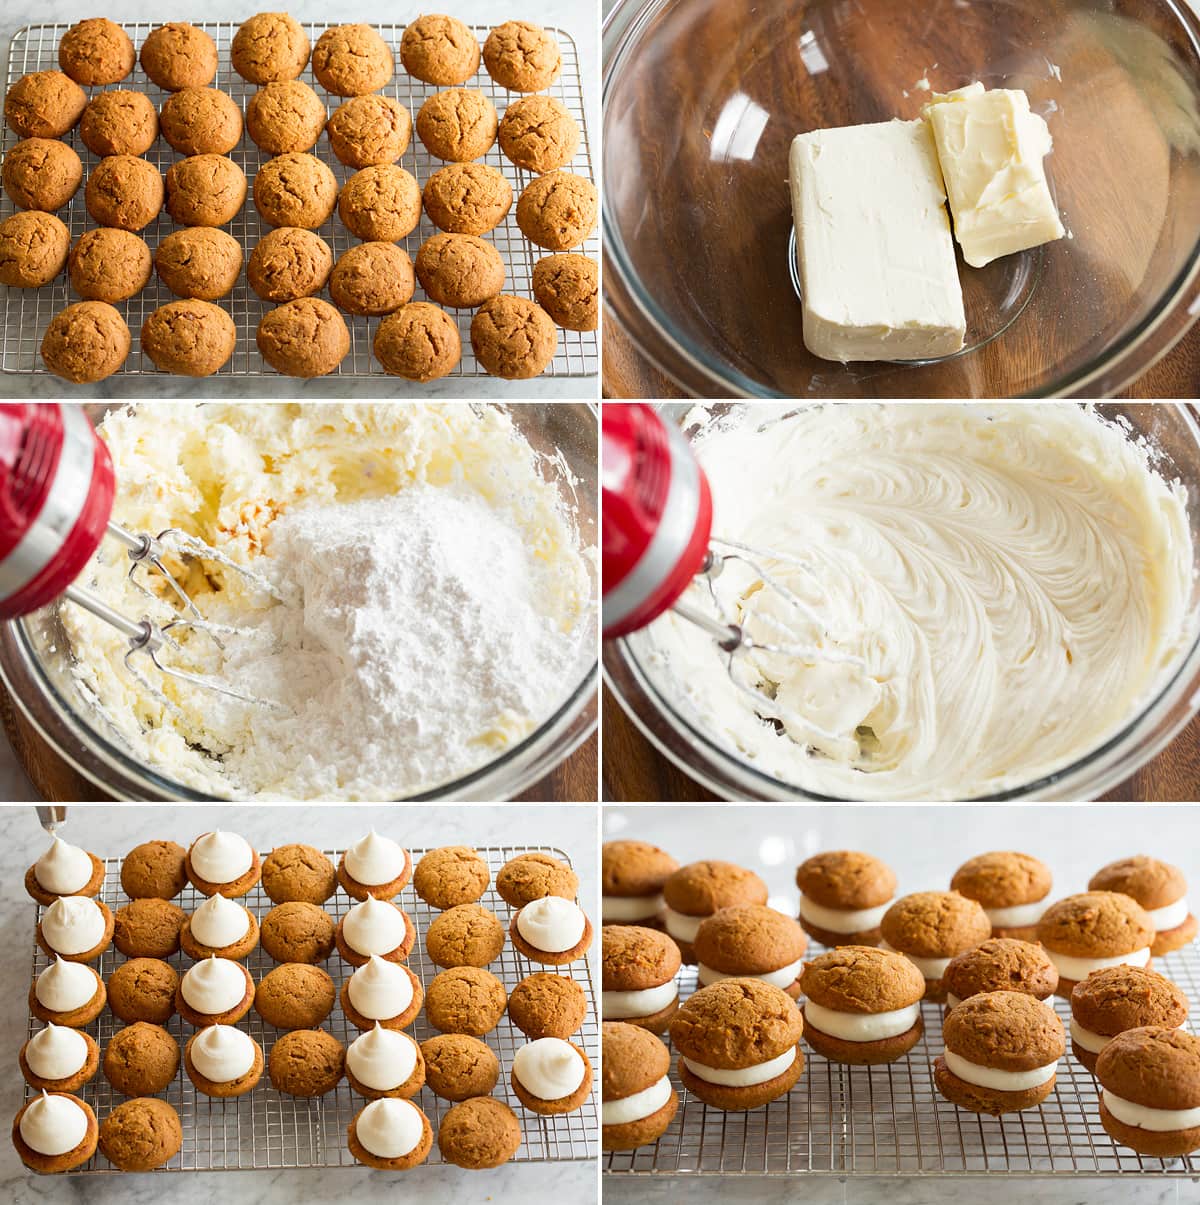 Steps of making cream cheese frosting filling for whoopie pies and filling cookies.